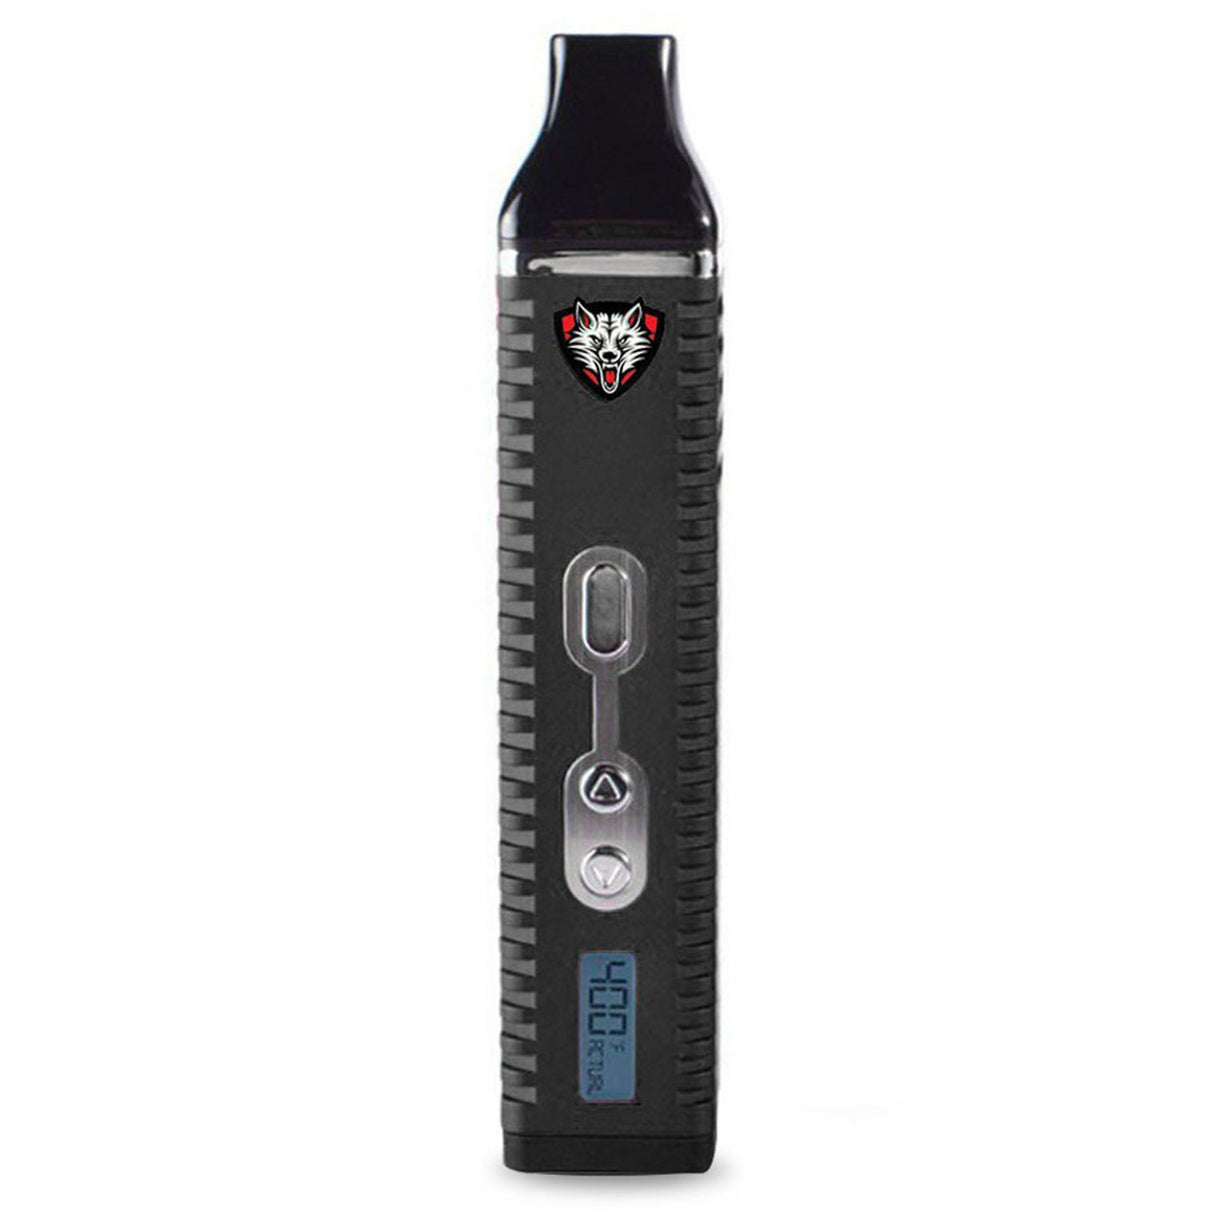 Wulf Vape Dry Herb Digital Vaporizer with LED Indicator Screen and Push Button Start